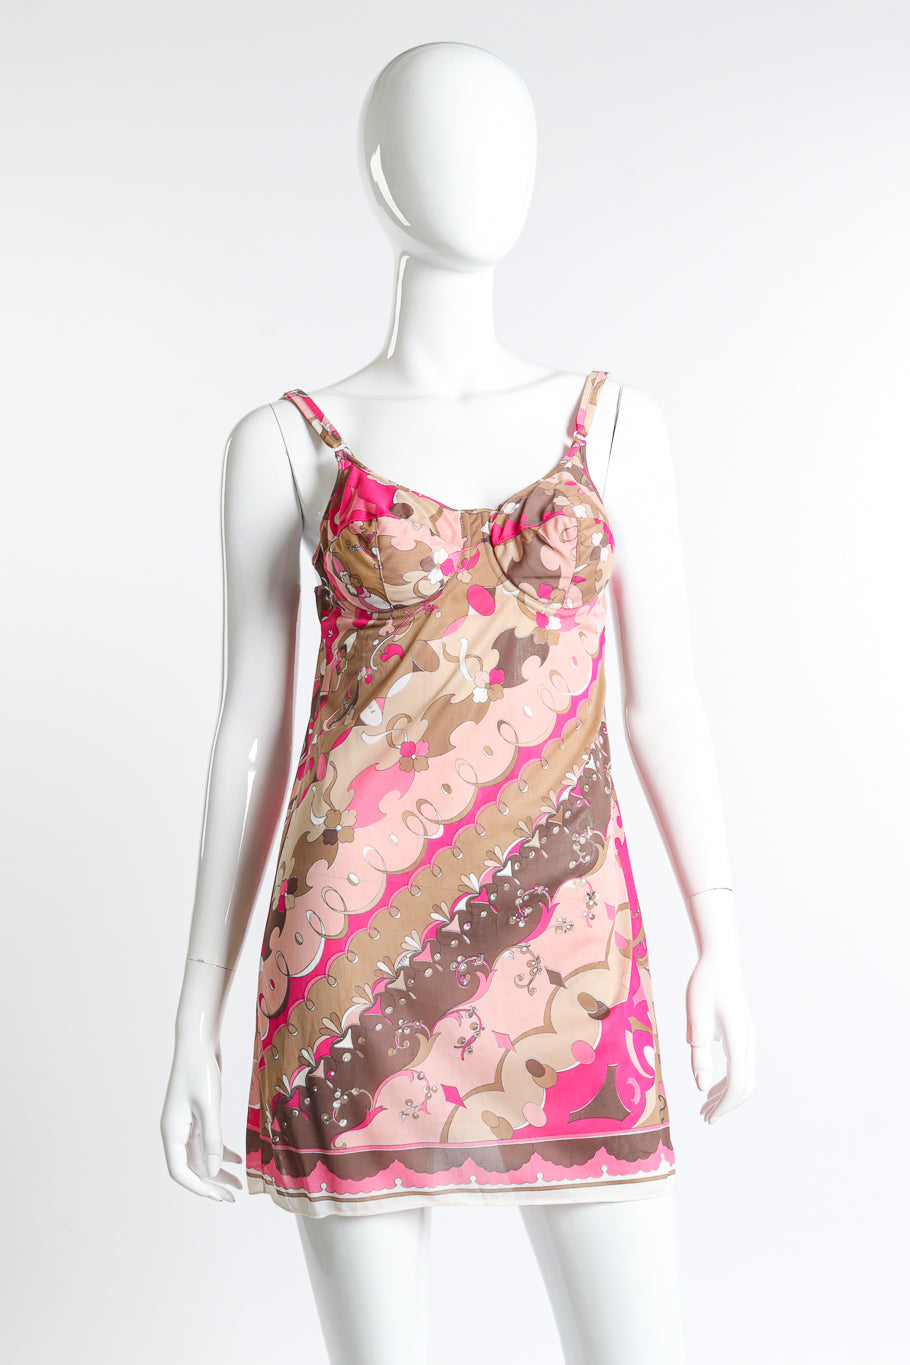 Vintage Emilio Pucci for Formfit Rogers taupe tan and pink mesh chemise front view as worn on mannequin @Recess LA